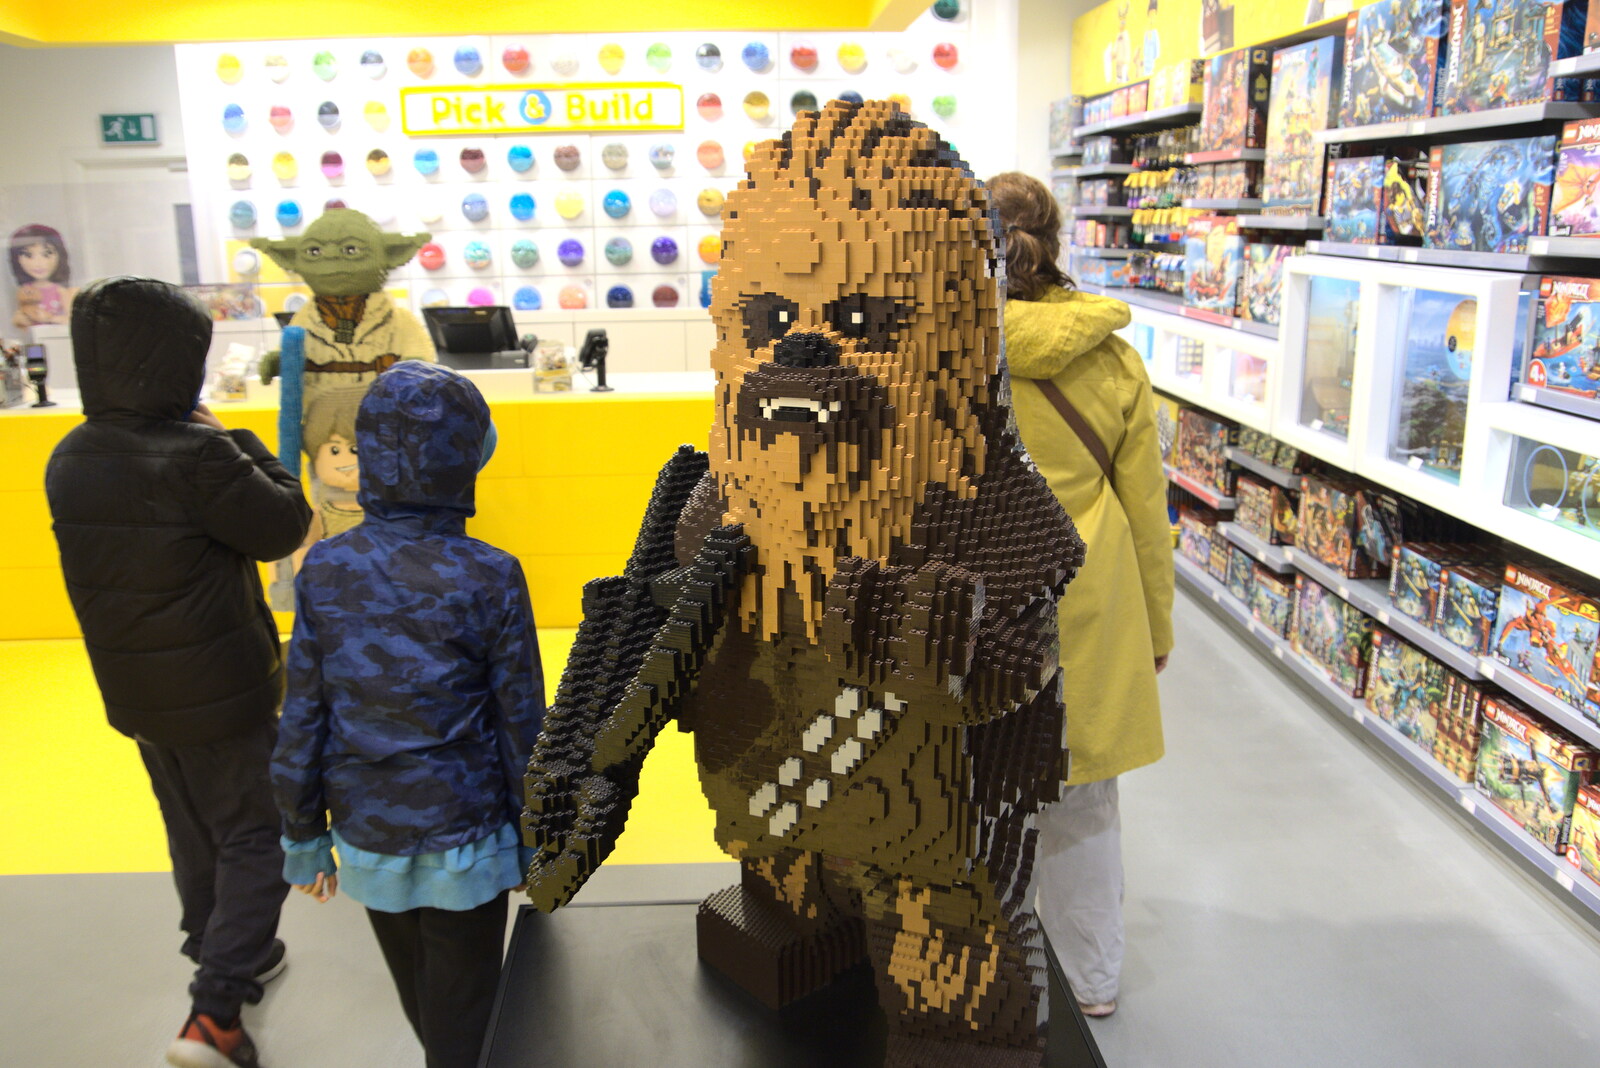 A giant Lego Chewbacca from Pork Pies and Dockside Dereliction, Melton Mowbray and Liverpool - 7th August 2021